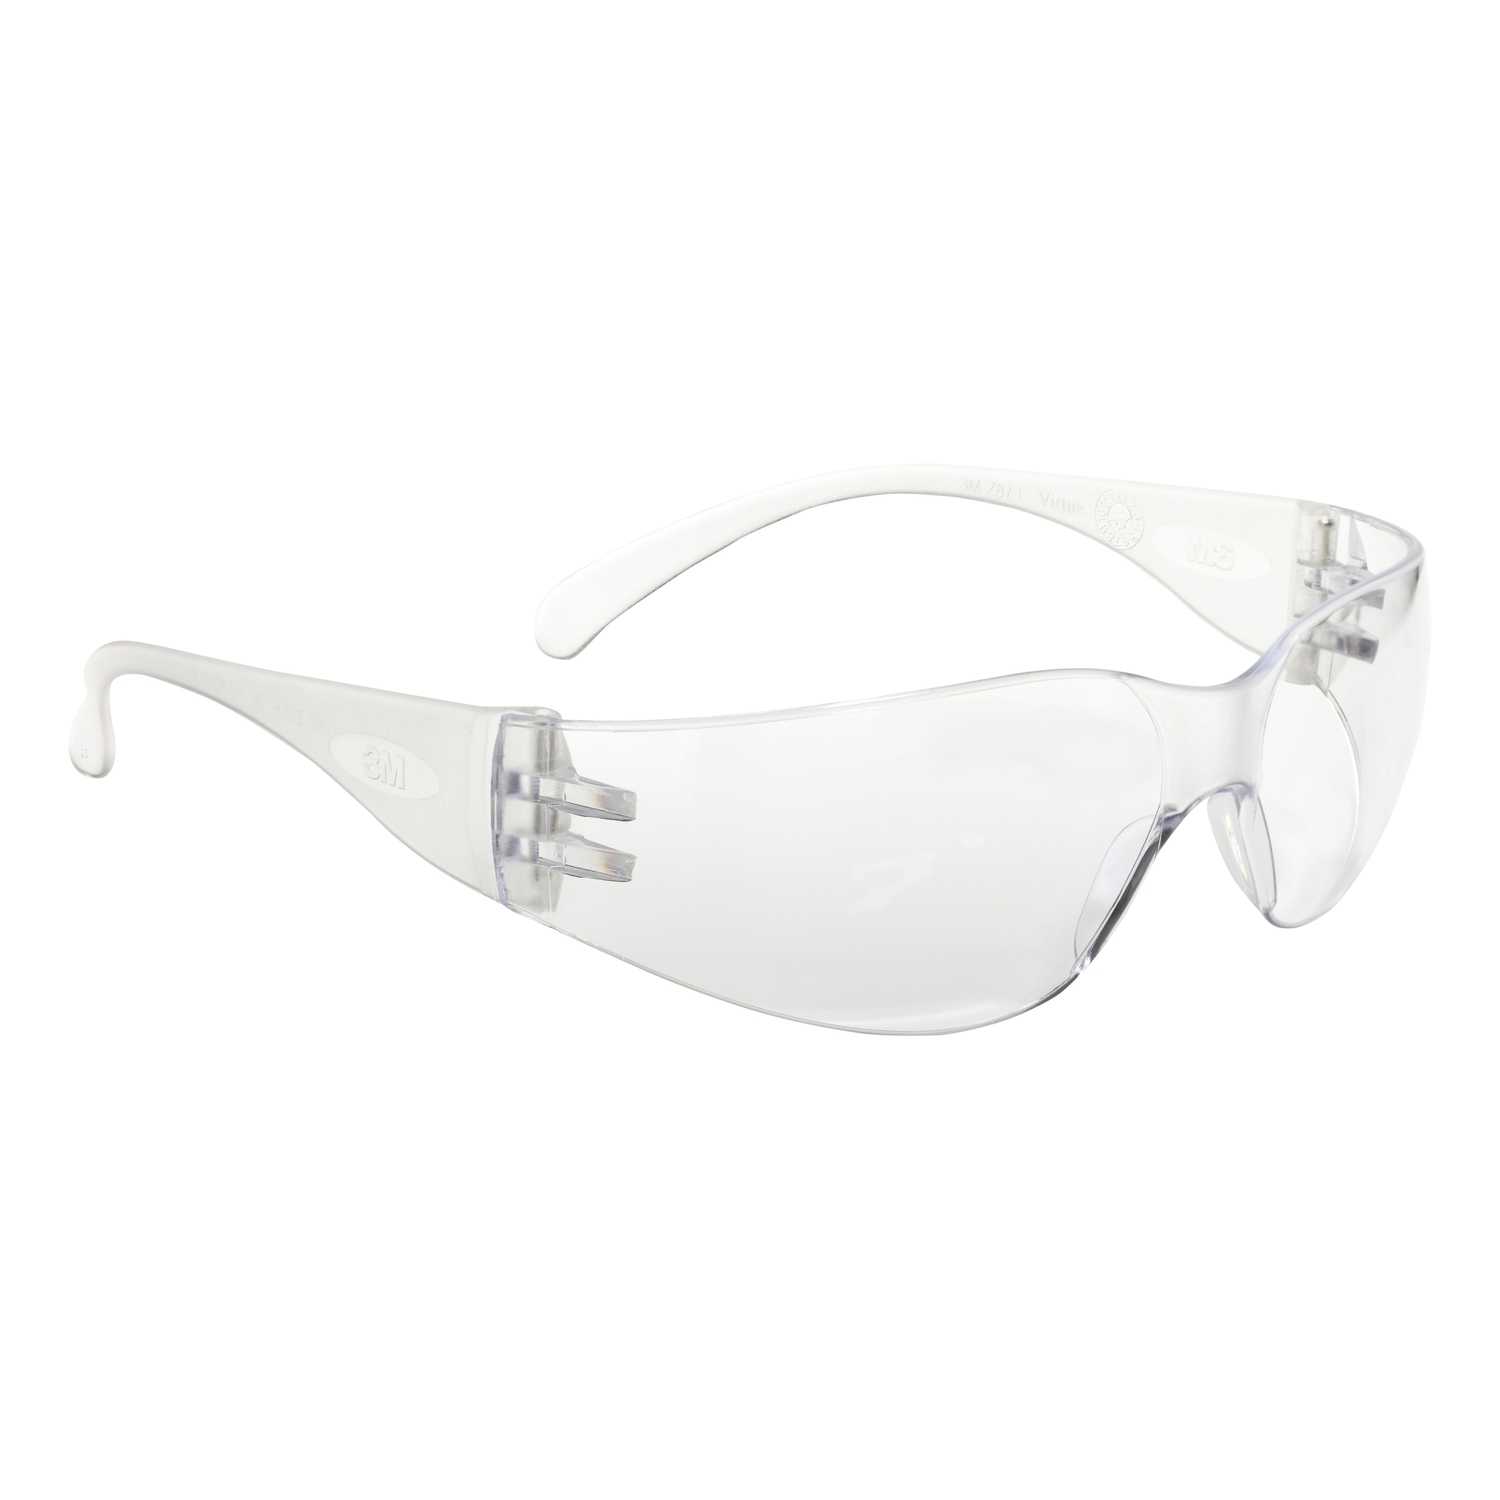 3M Safety Glasses Clear Lens Clear Frame 1 pc. Ace Hardware